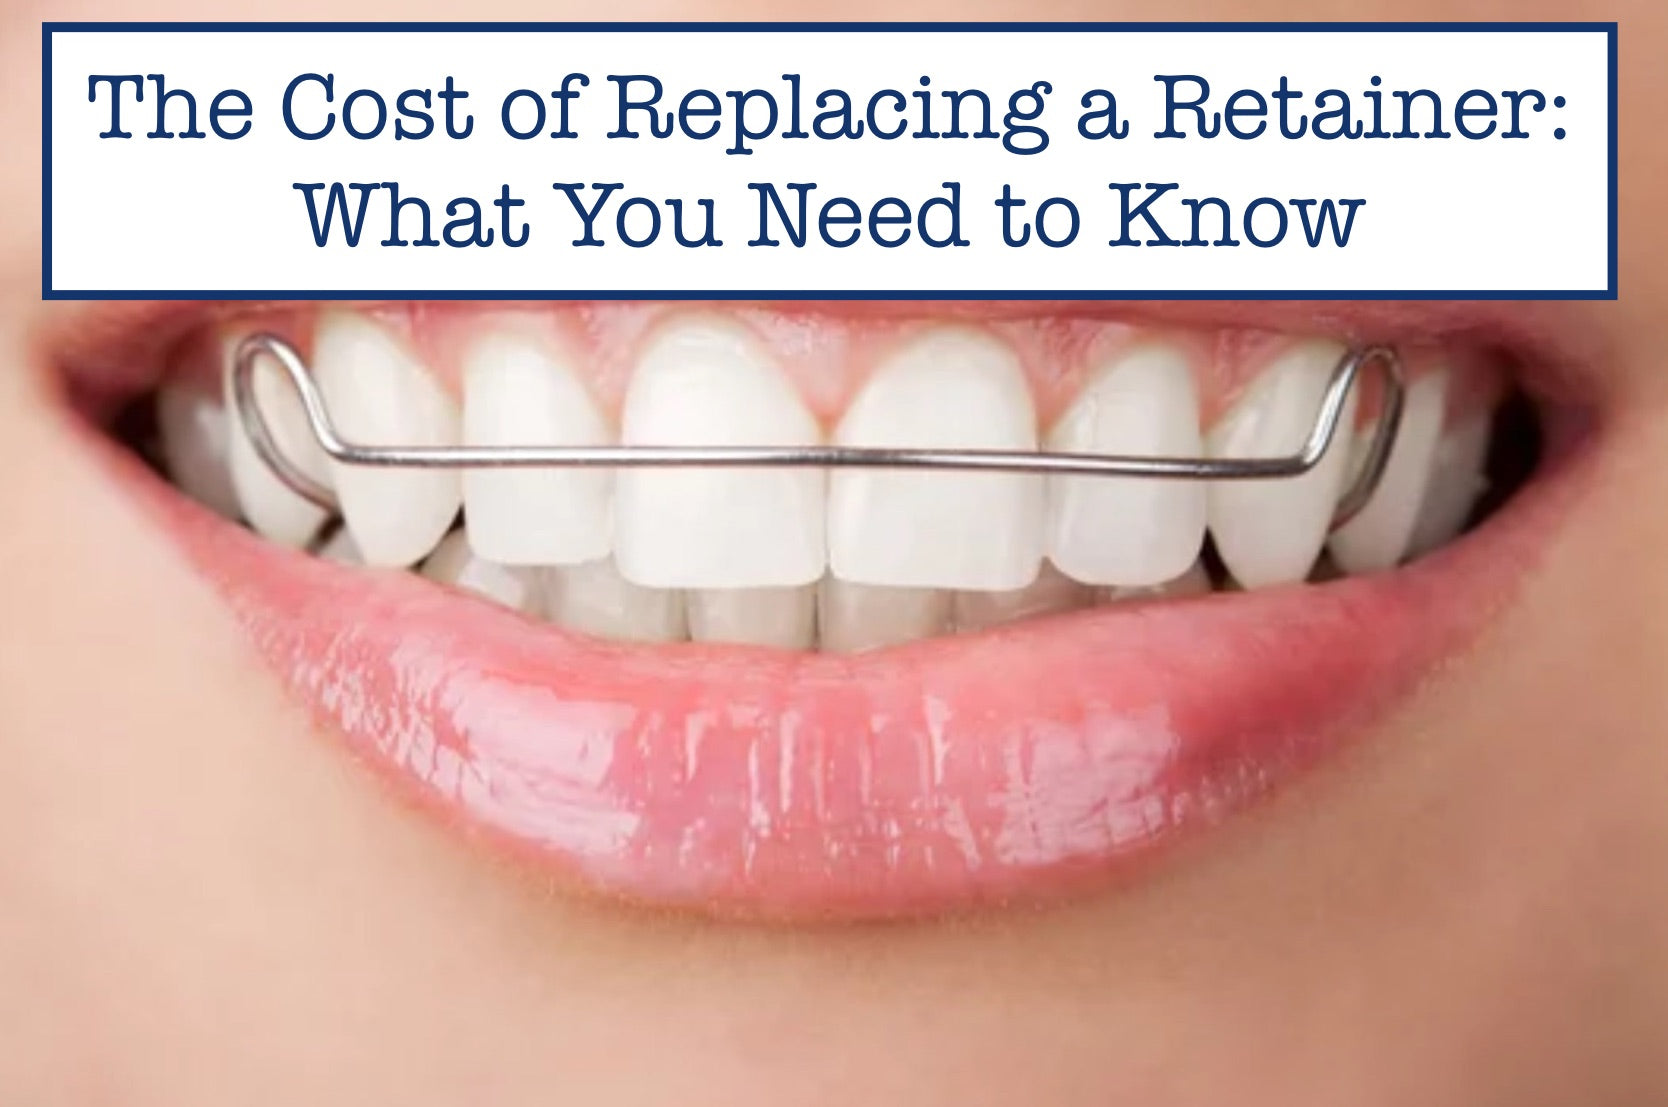 The Cost of Replacing a Retainer: What You Need to Know